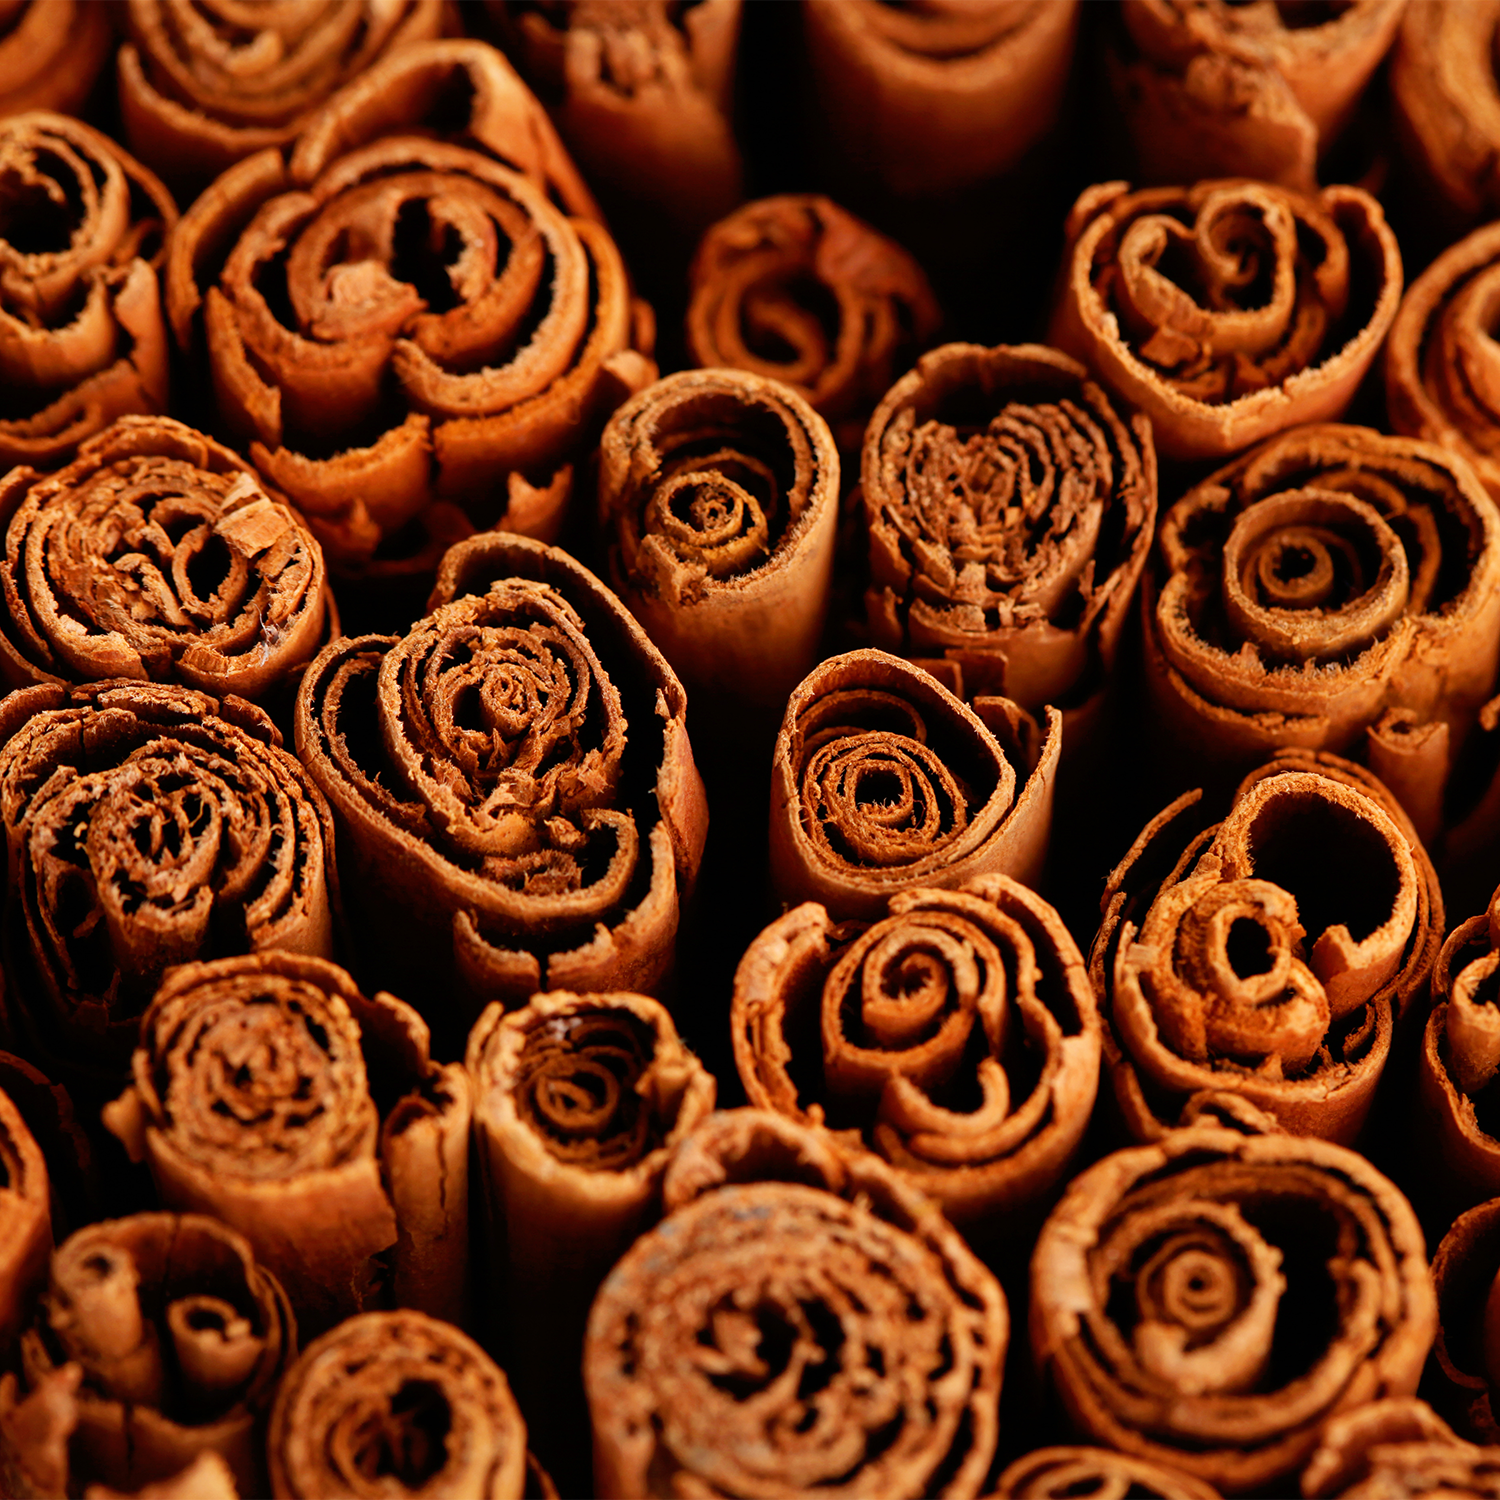 Cinnamon sticks represent the notes of the spice found in Tuscany Candle's fragrance "Cinnamon Coffee Cake"